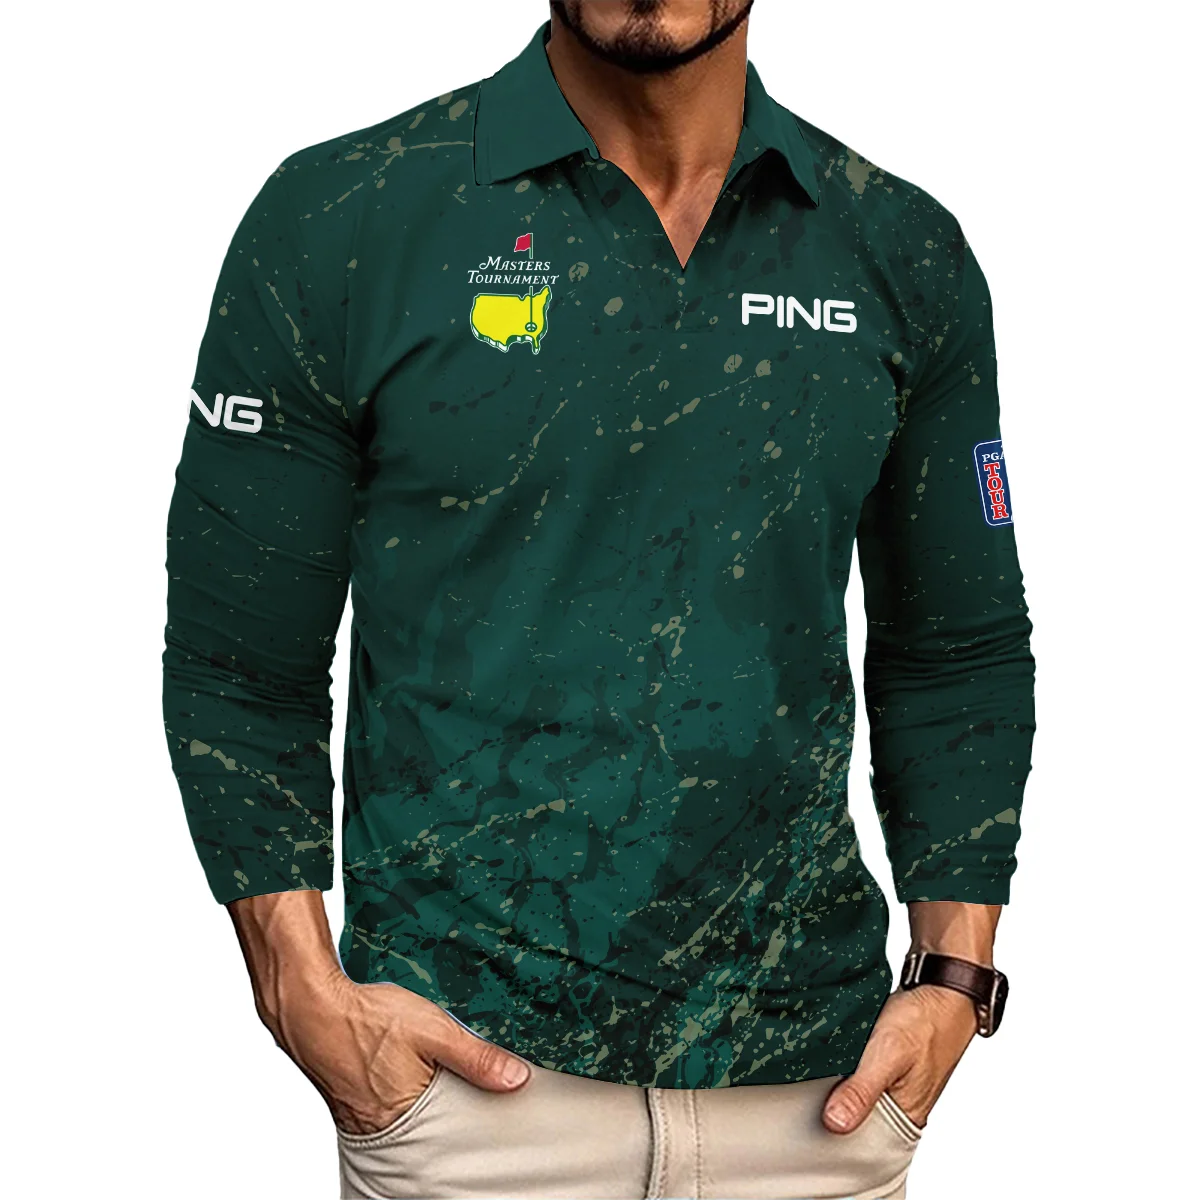 Old Cracked Texture With Gold Splash Paint Masters Tournament Ping Vneck Long Polo Shirt Style Classic Long Polo Shirt For Men